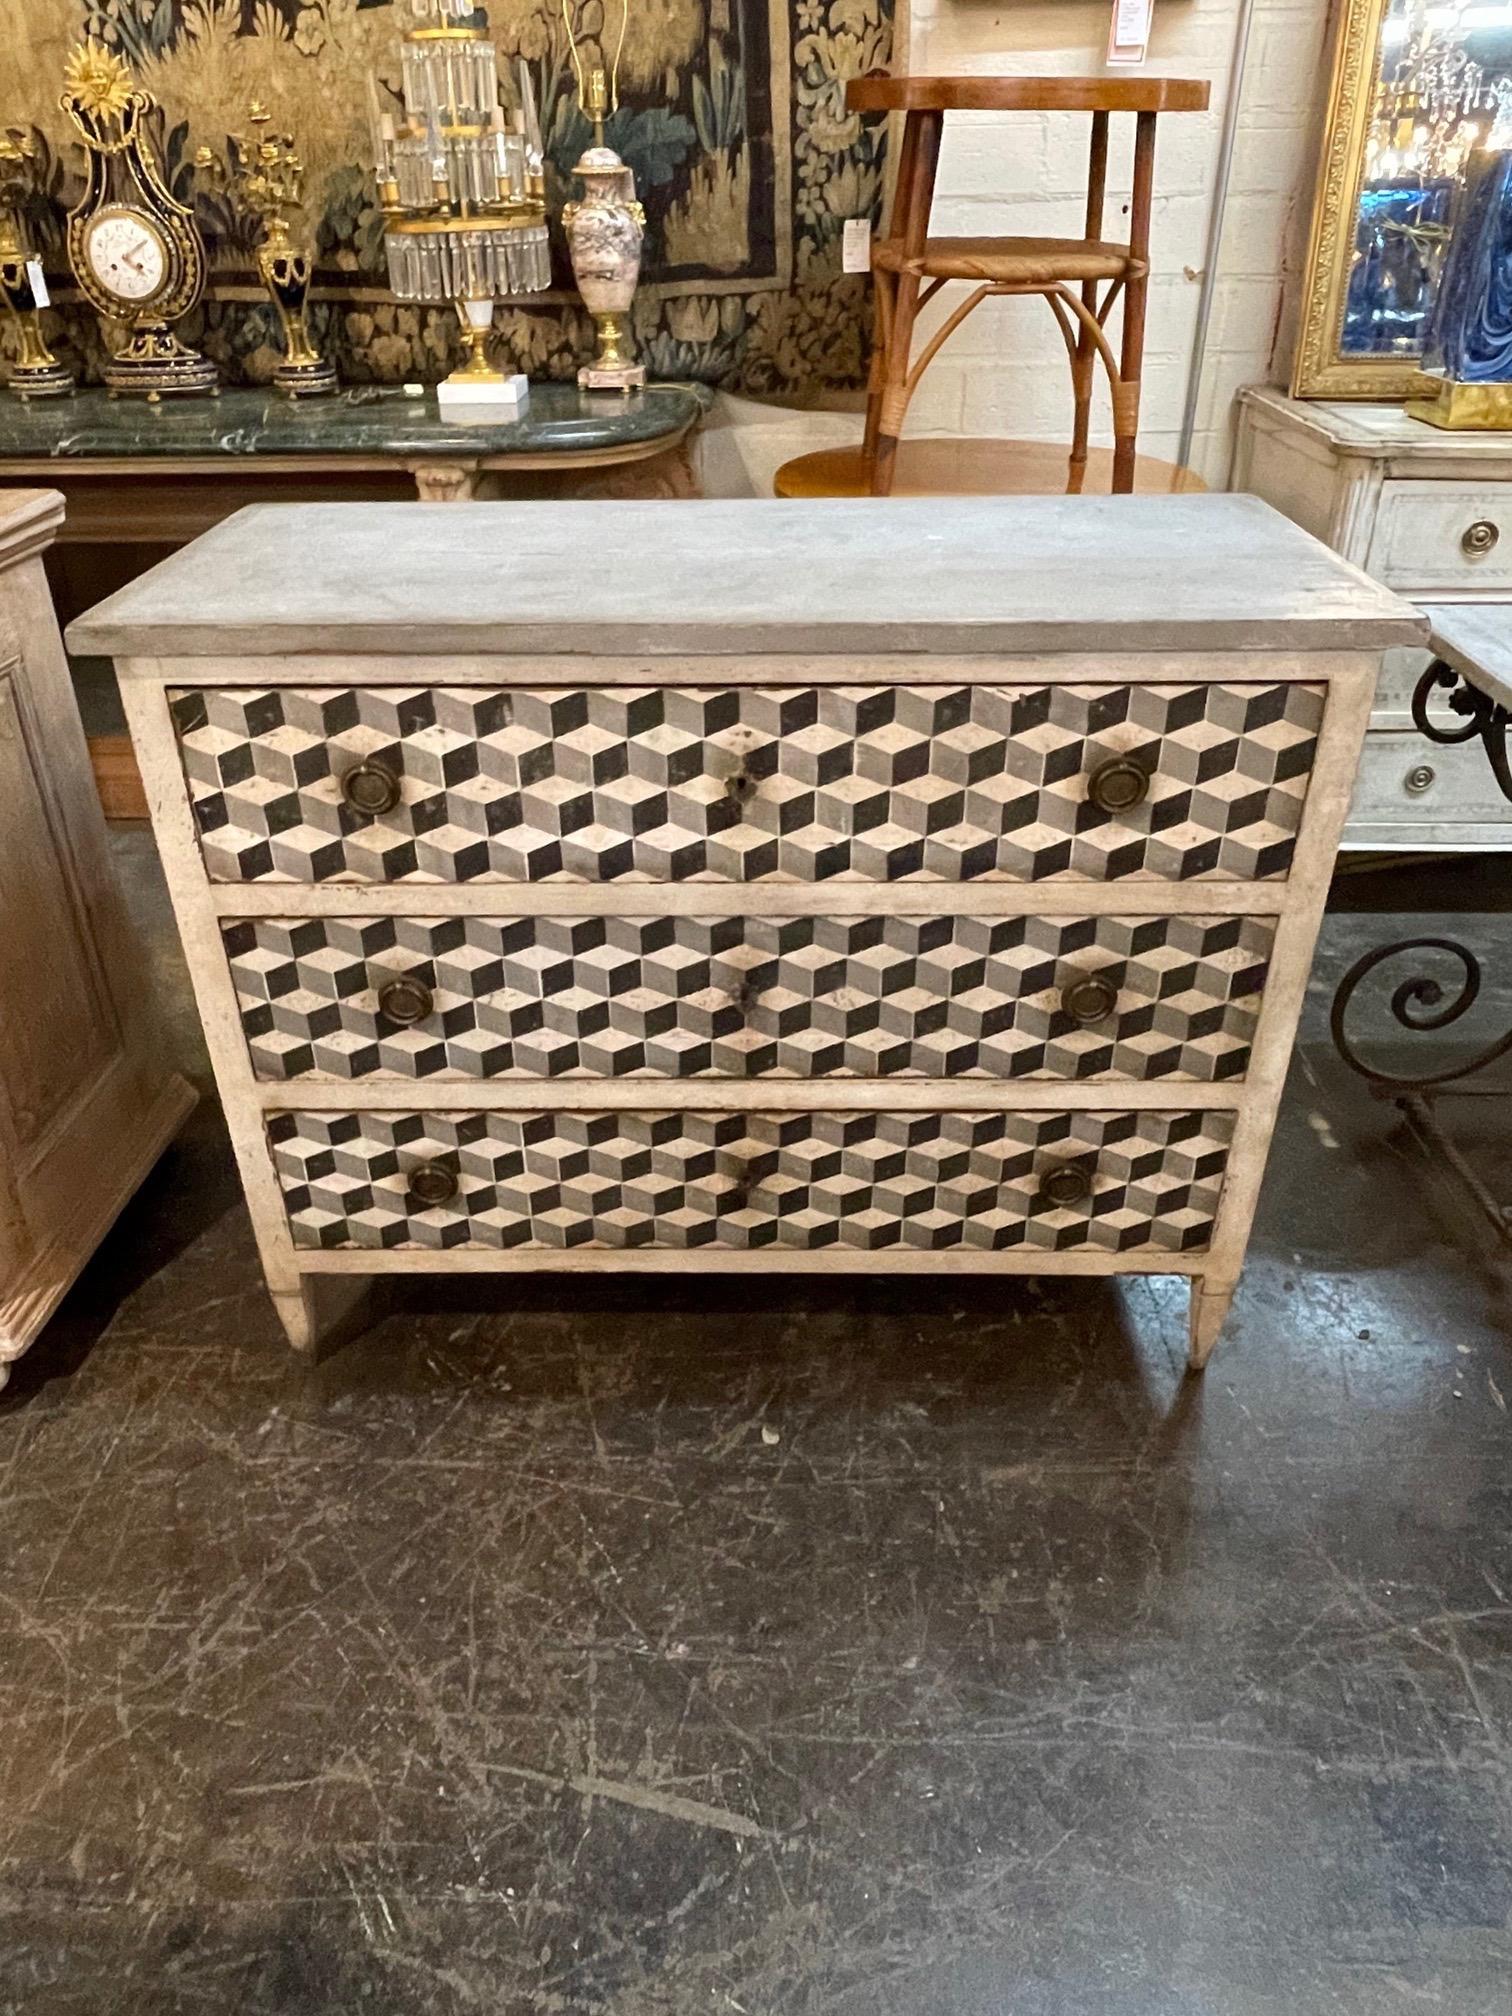 Fabulous 19th century Italian commode with a hand painted geometric design in colors of black, white and grey. The design has a real 3 - D look to it. A real conversation piece that adds a touch of pizzazz to your decor!